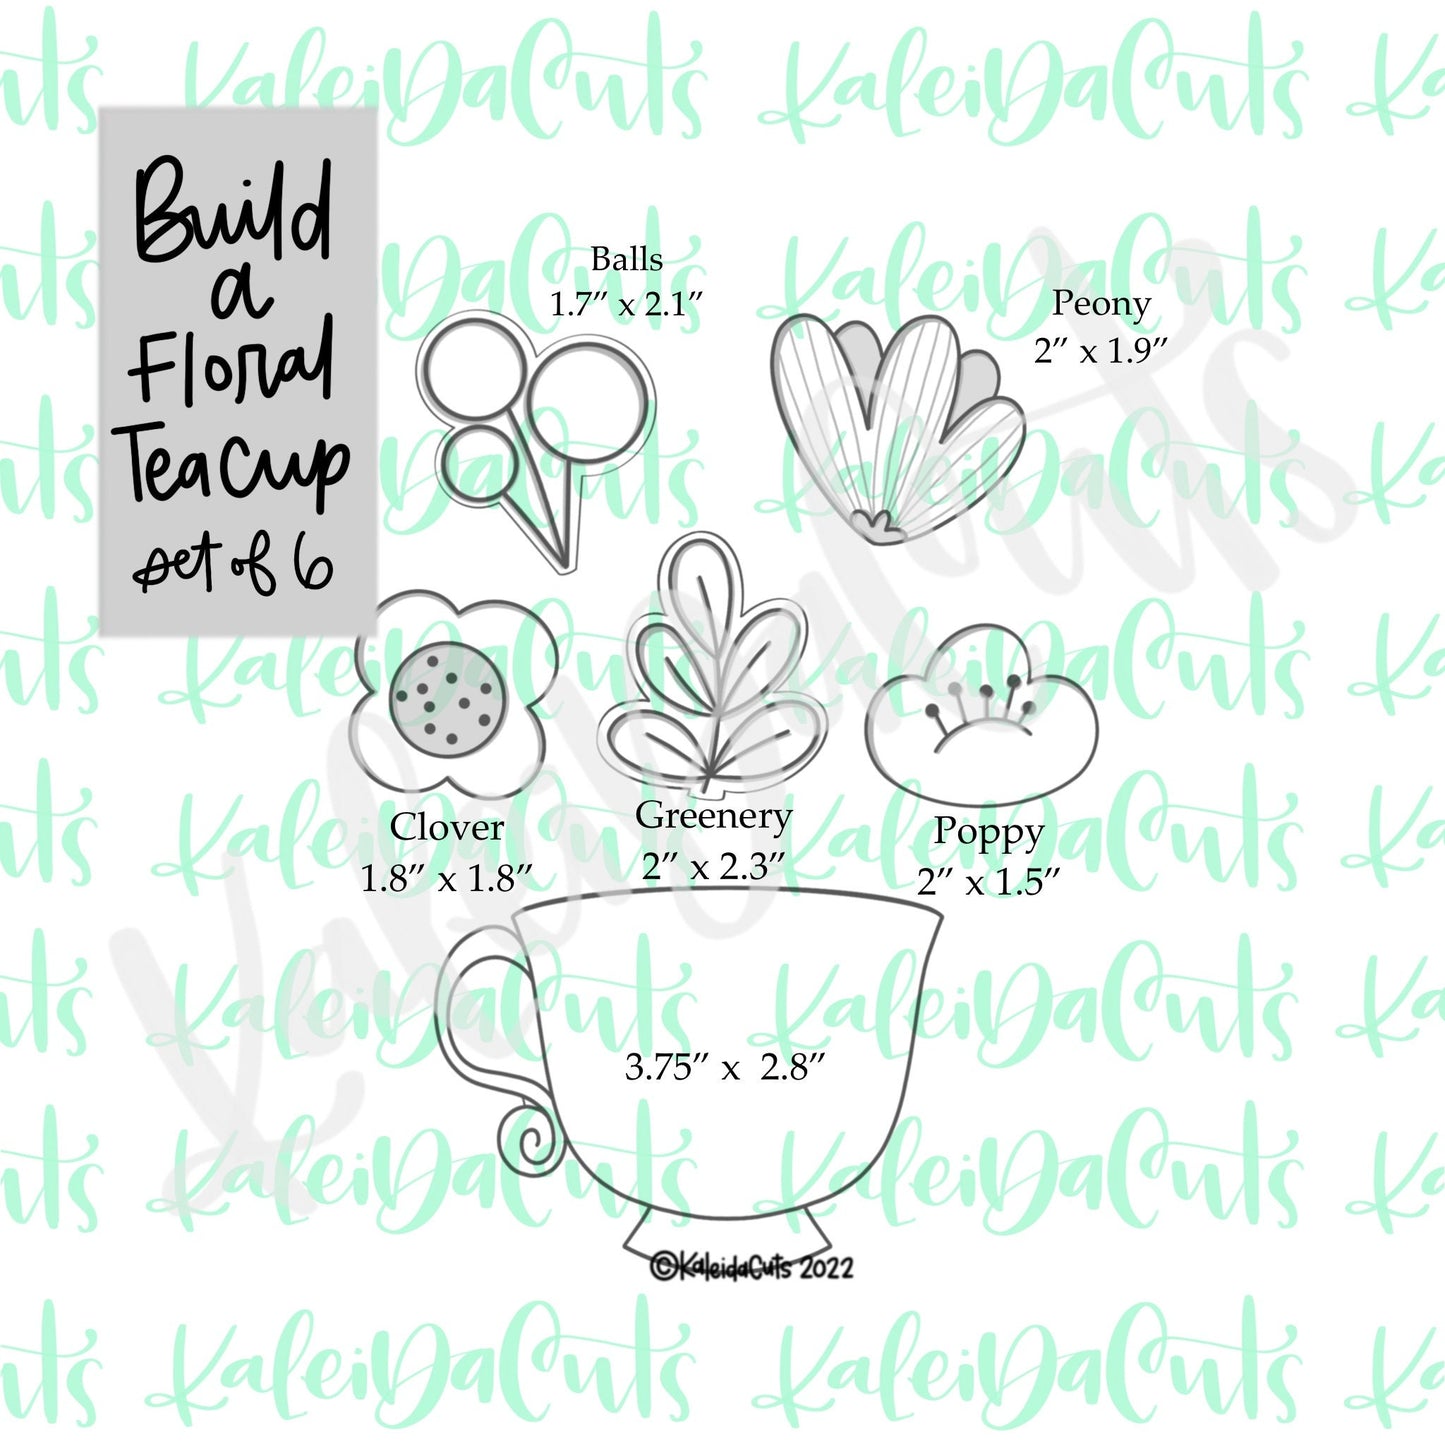 Build a Floral Teacup Set of 6 Cookie Cutters